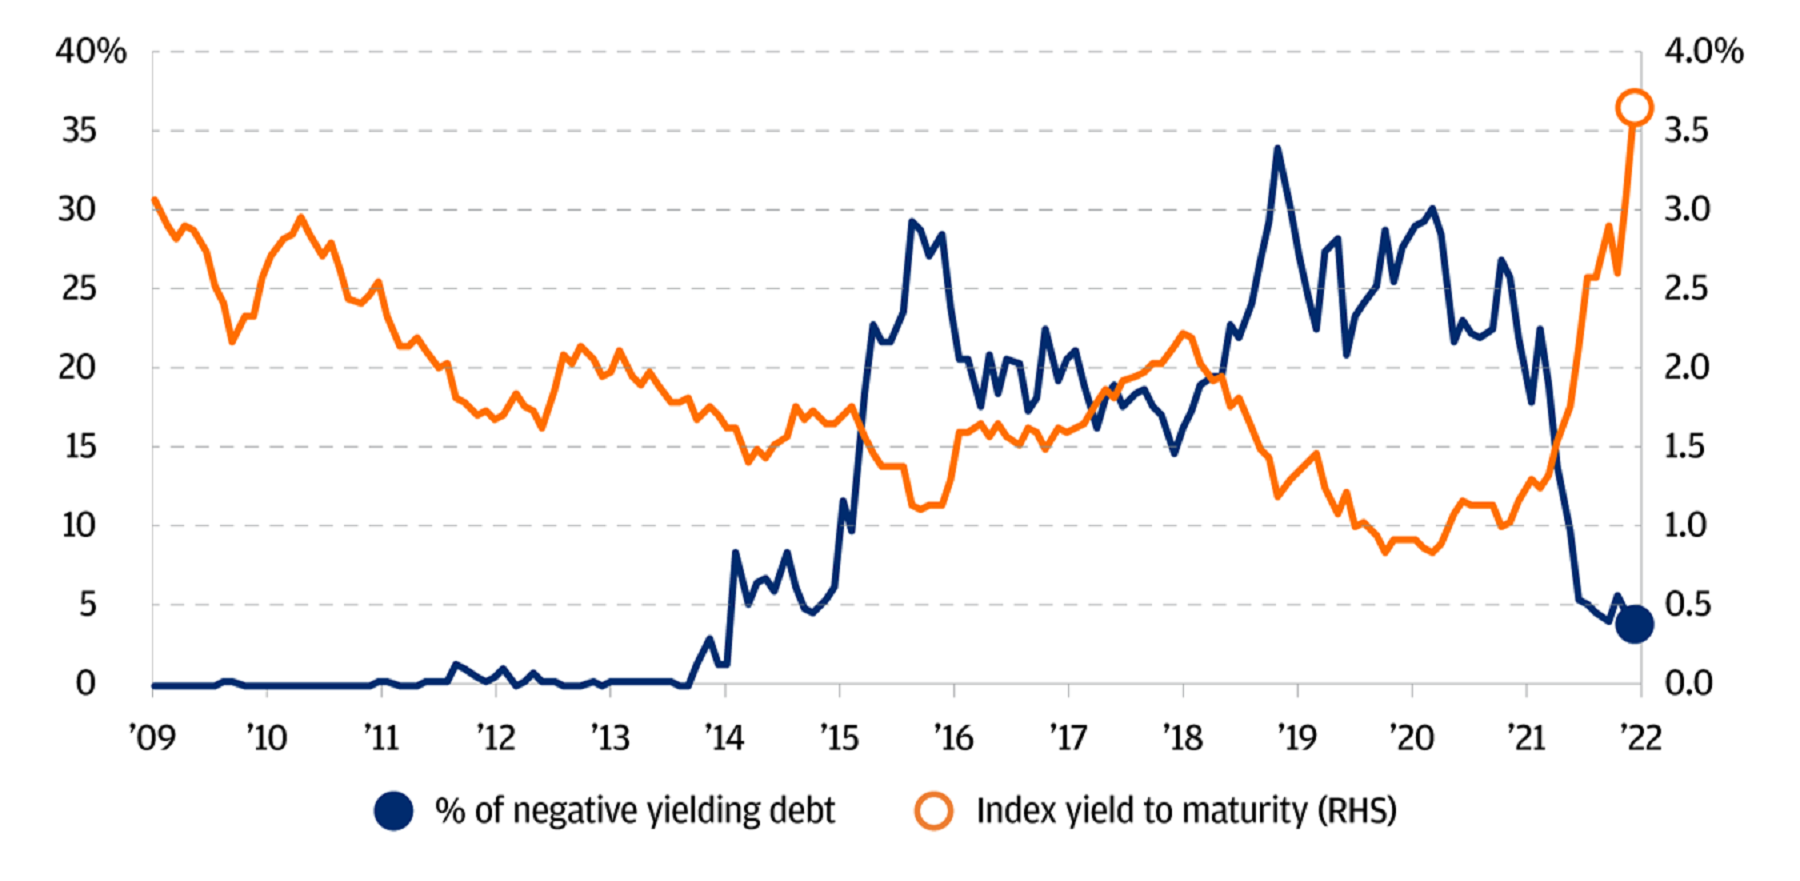 This graph shows the percentage of negative yielding debt vs. the index yield to maturity from 2009 through 2021.